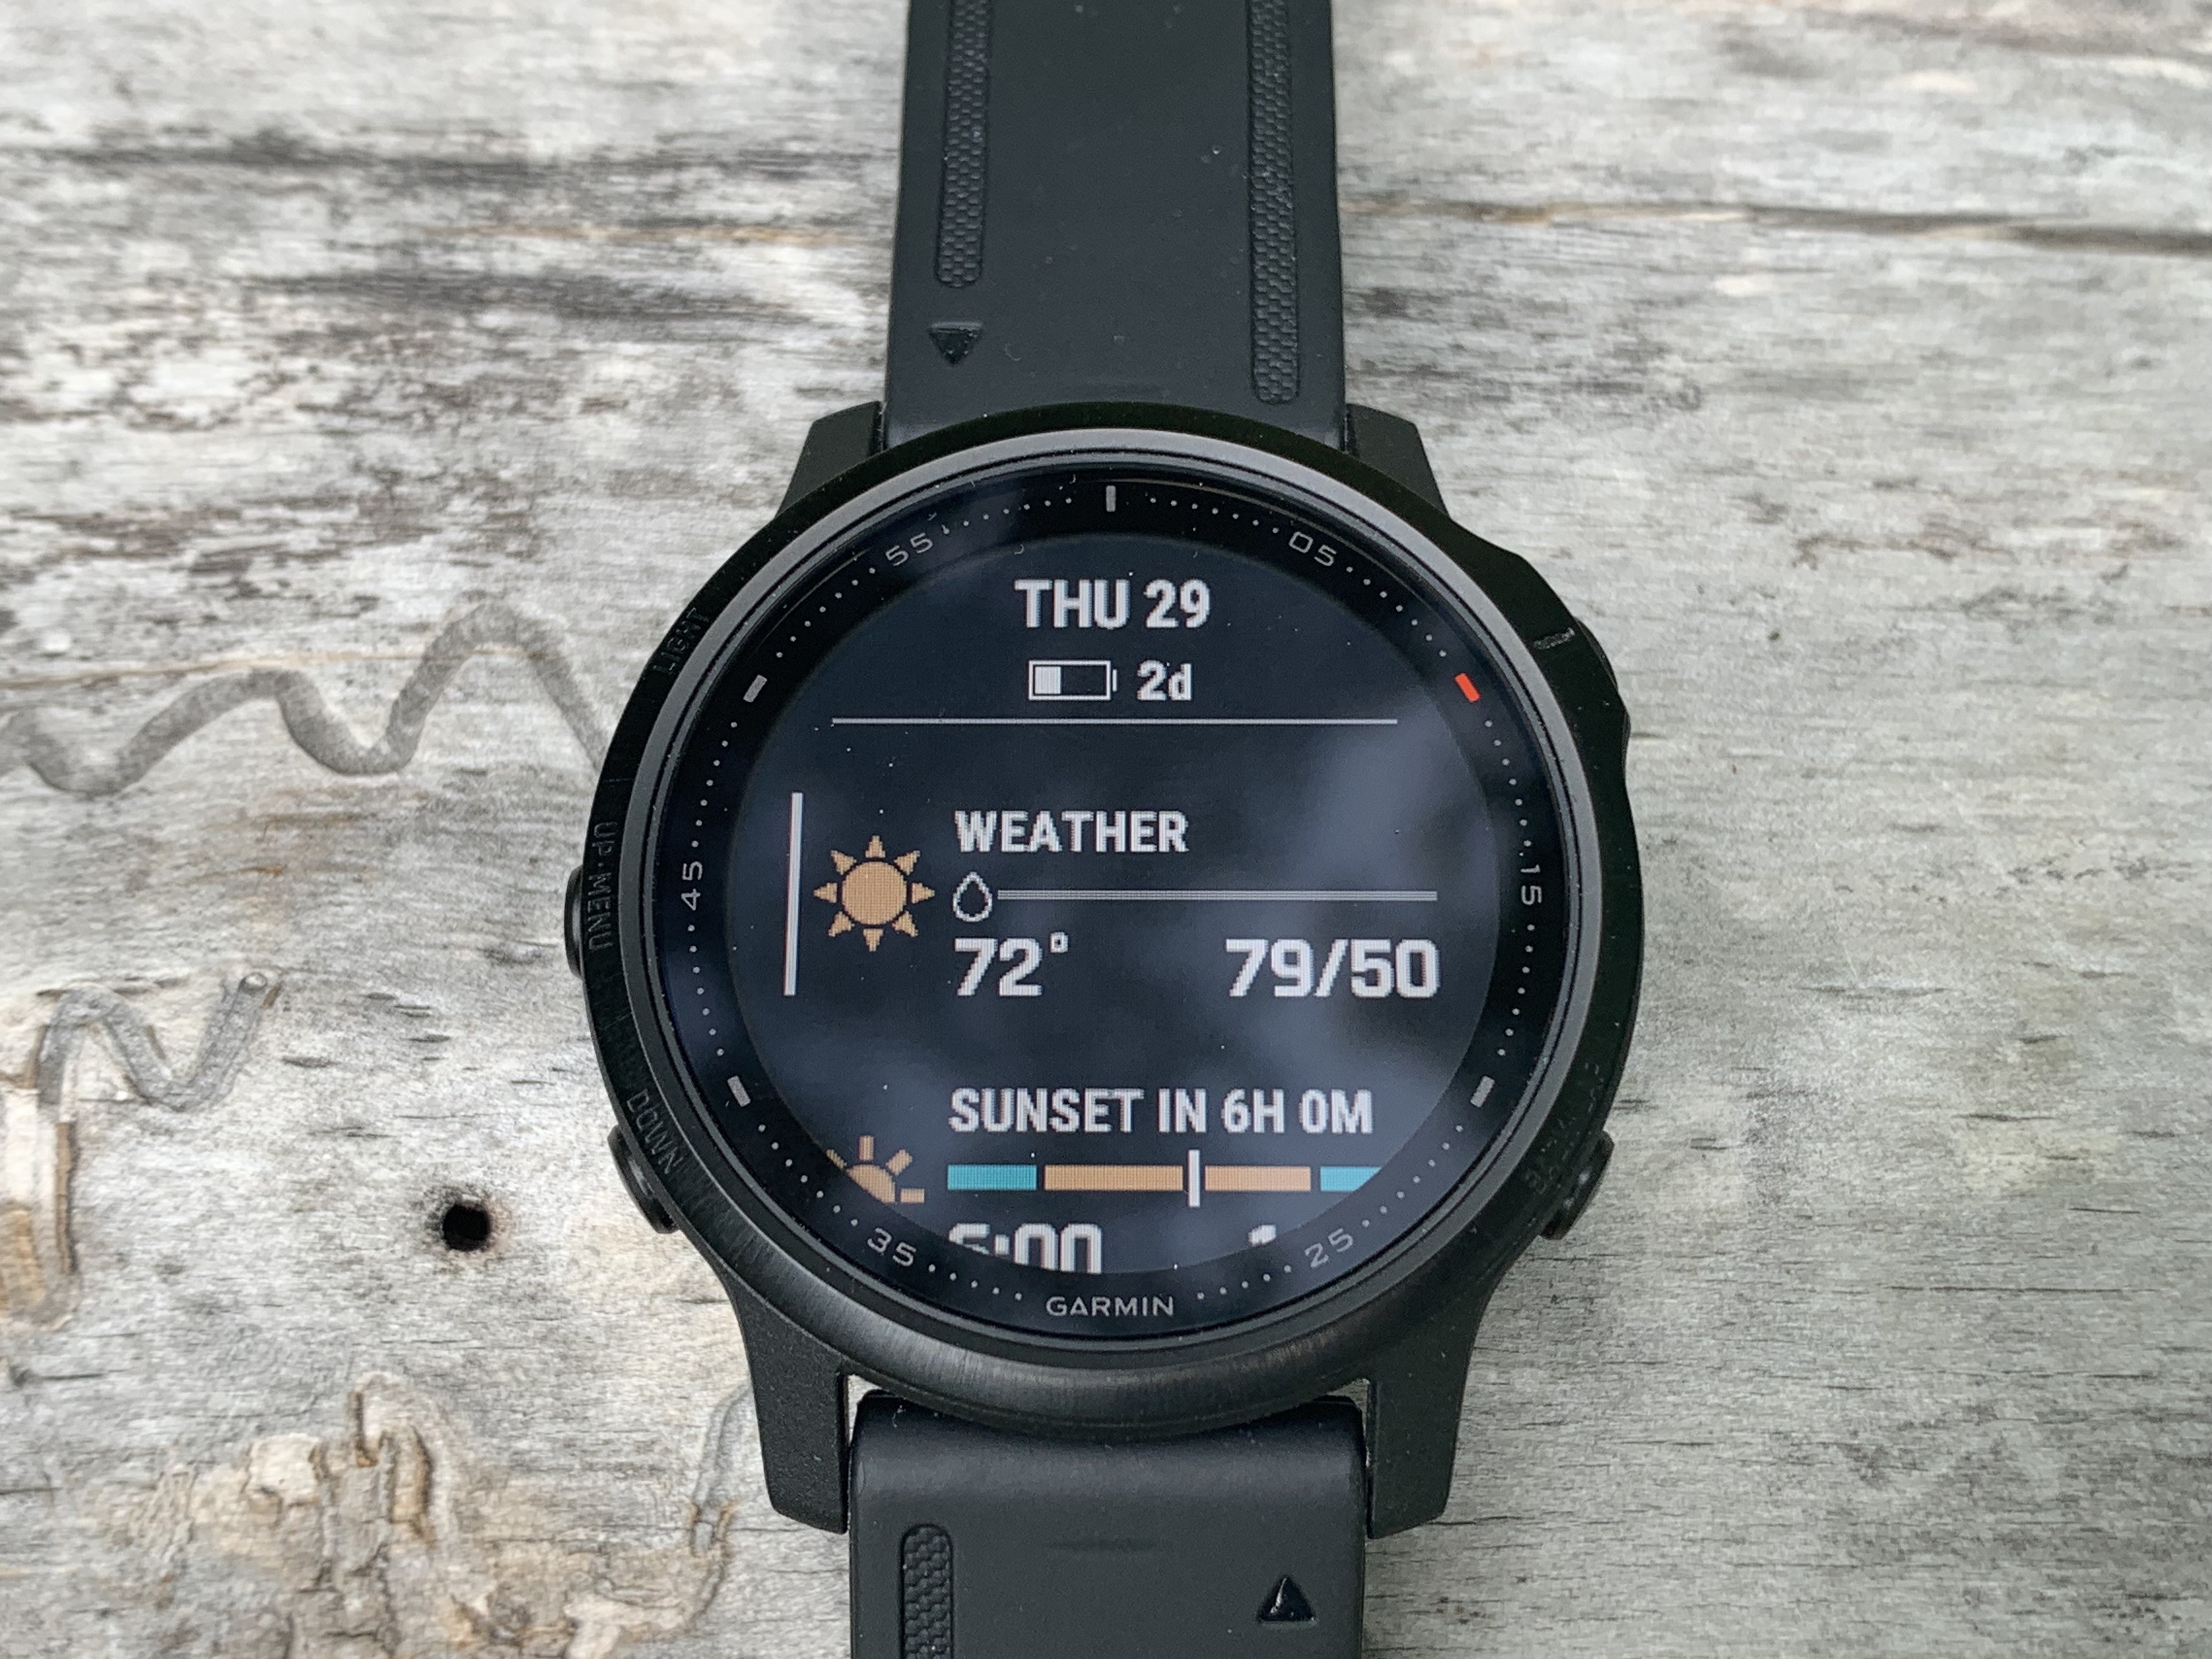 Garmin Fenix 6S Pro Review: A Small Watch With A Big Punch